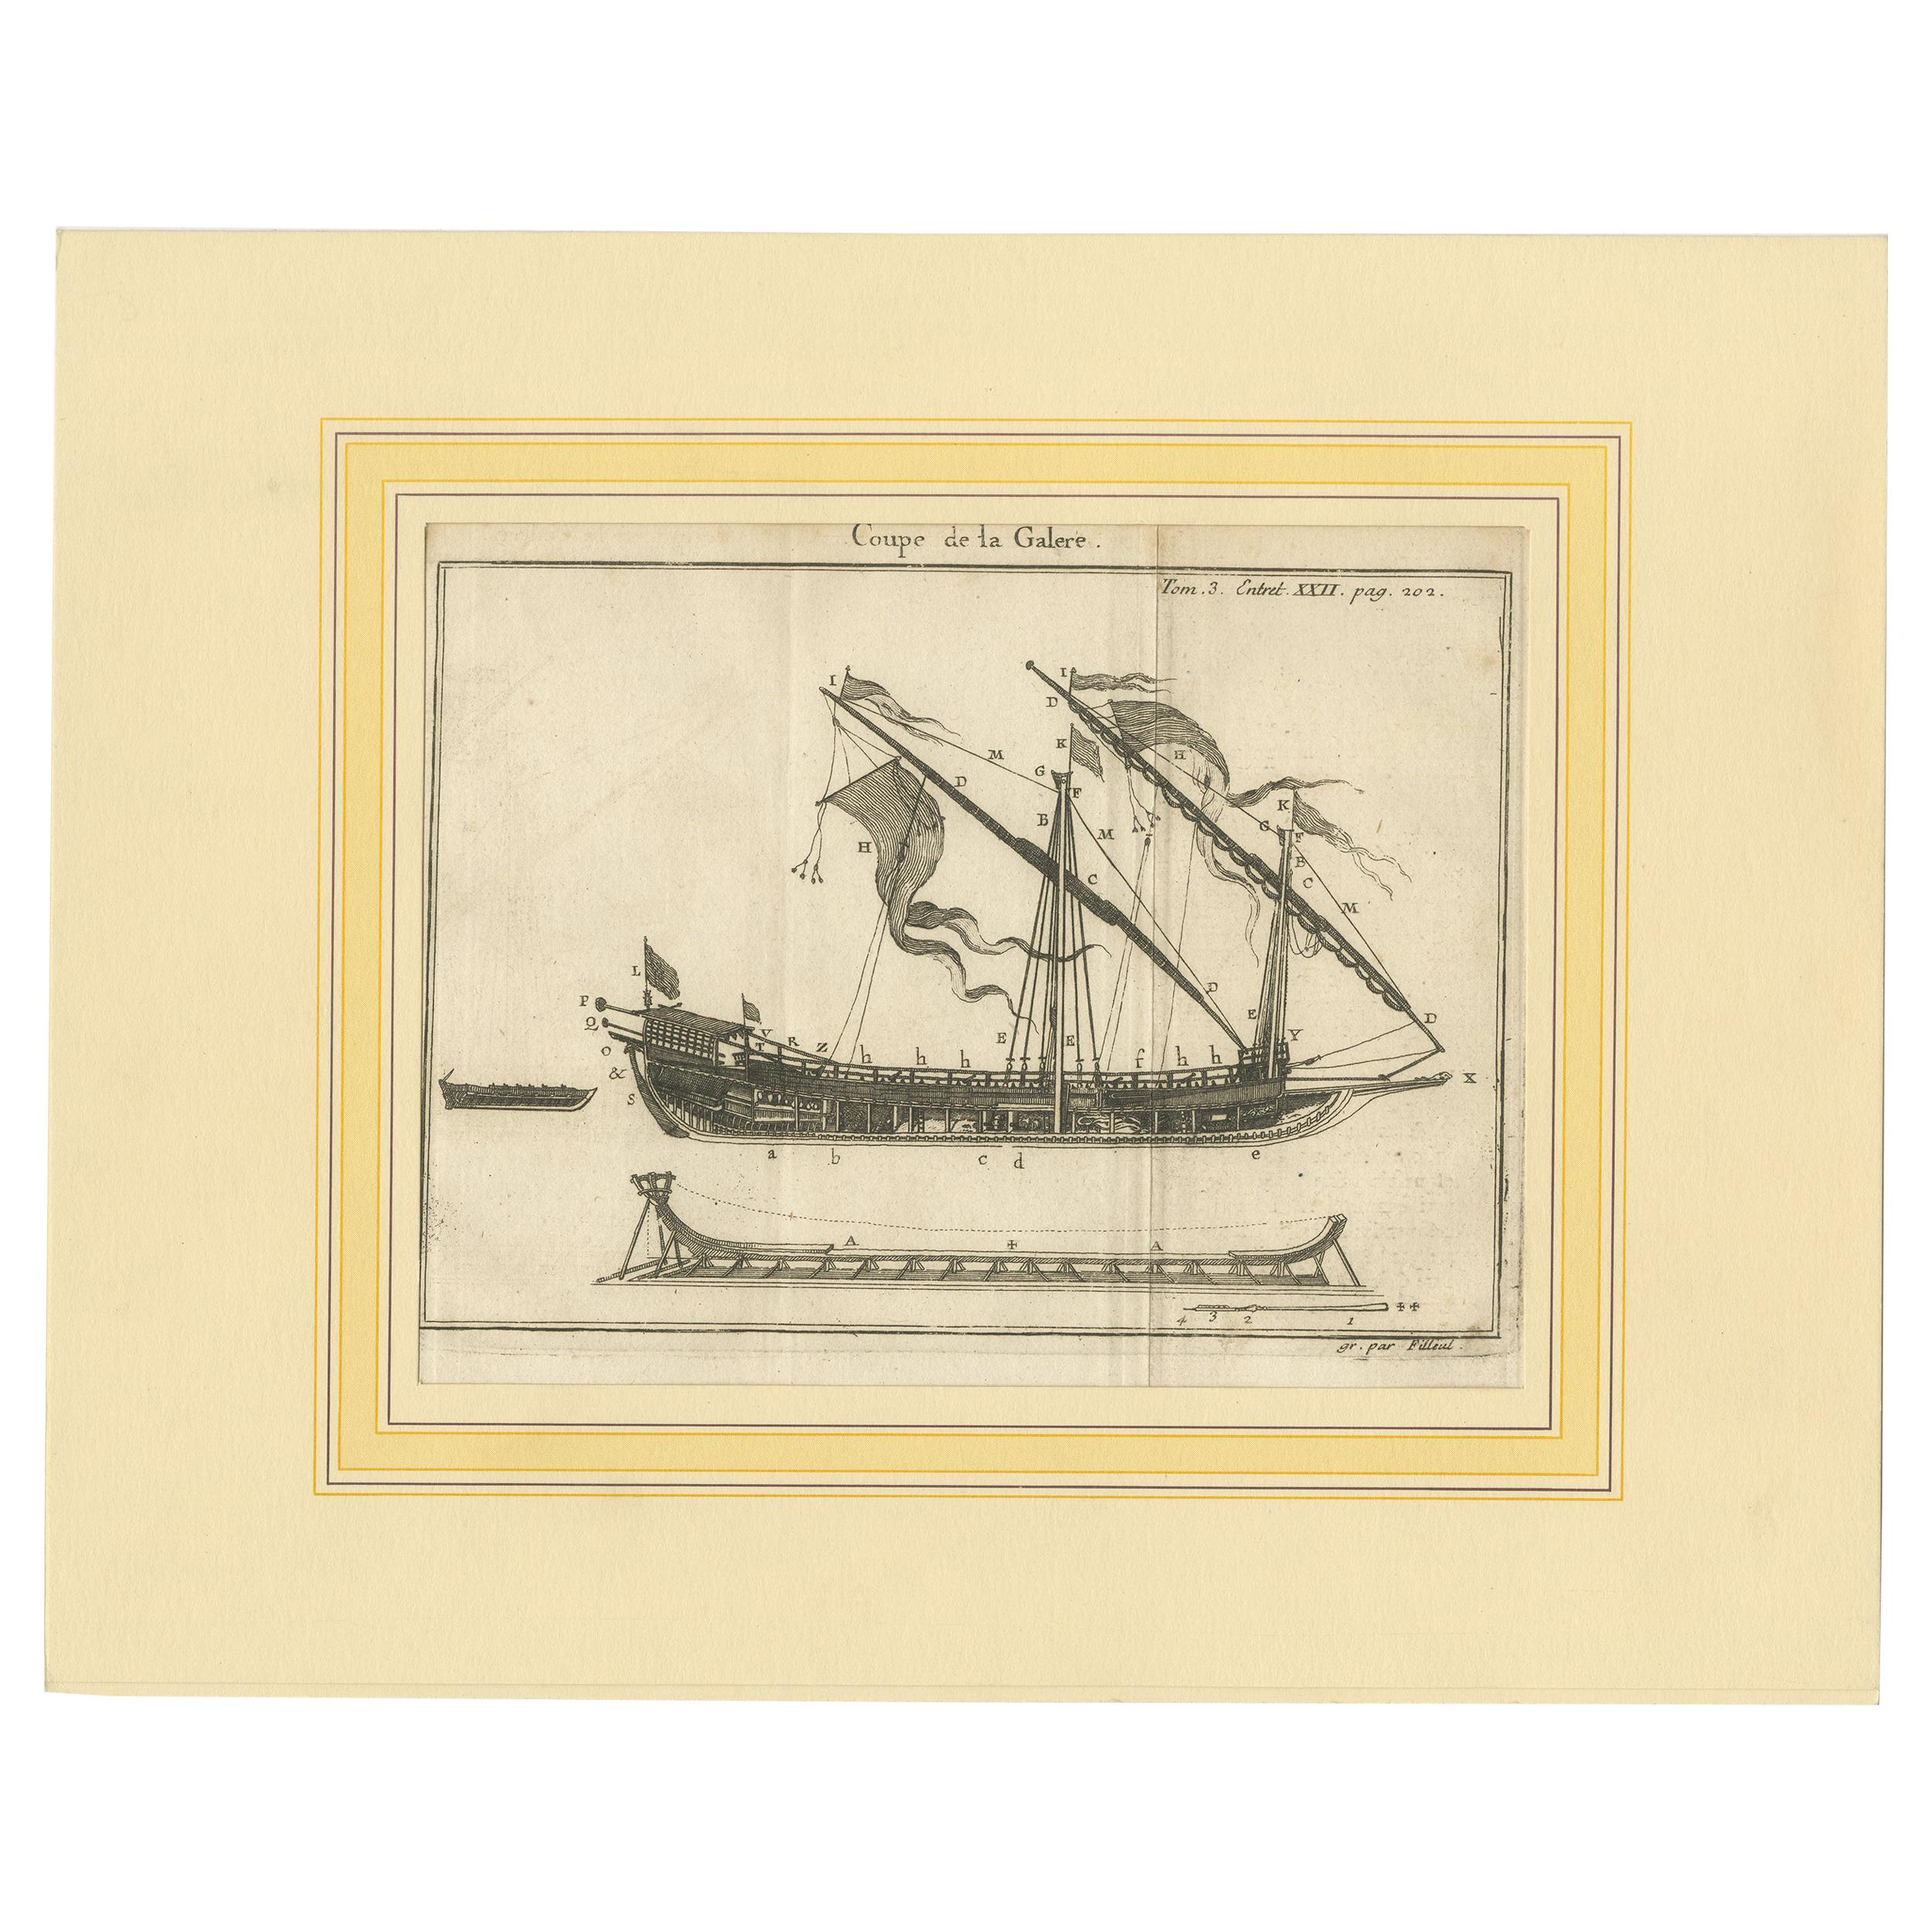 Antique Print of a Galley Cross Section by Pluche '1735'